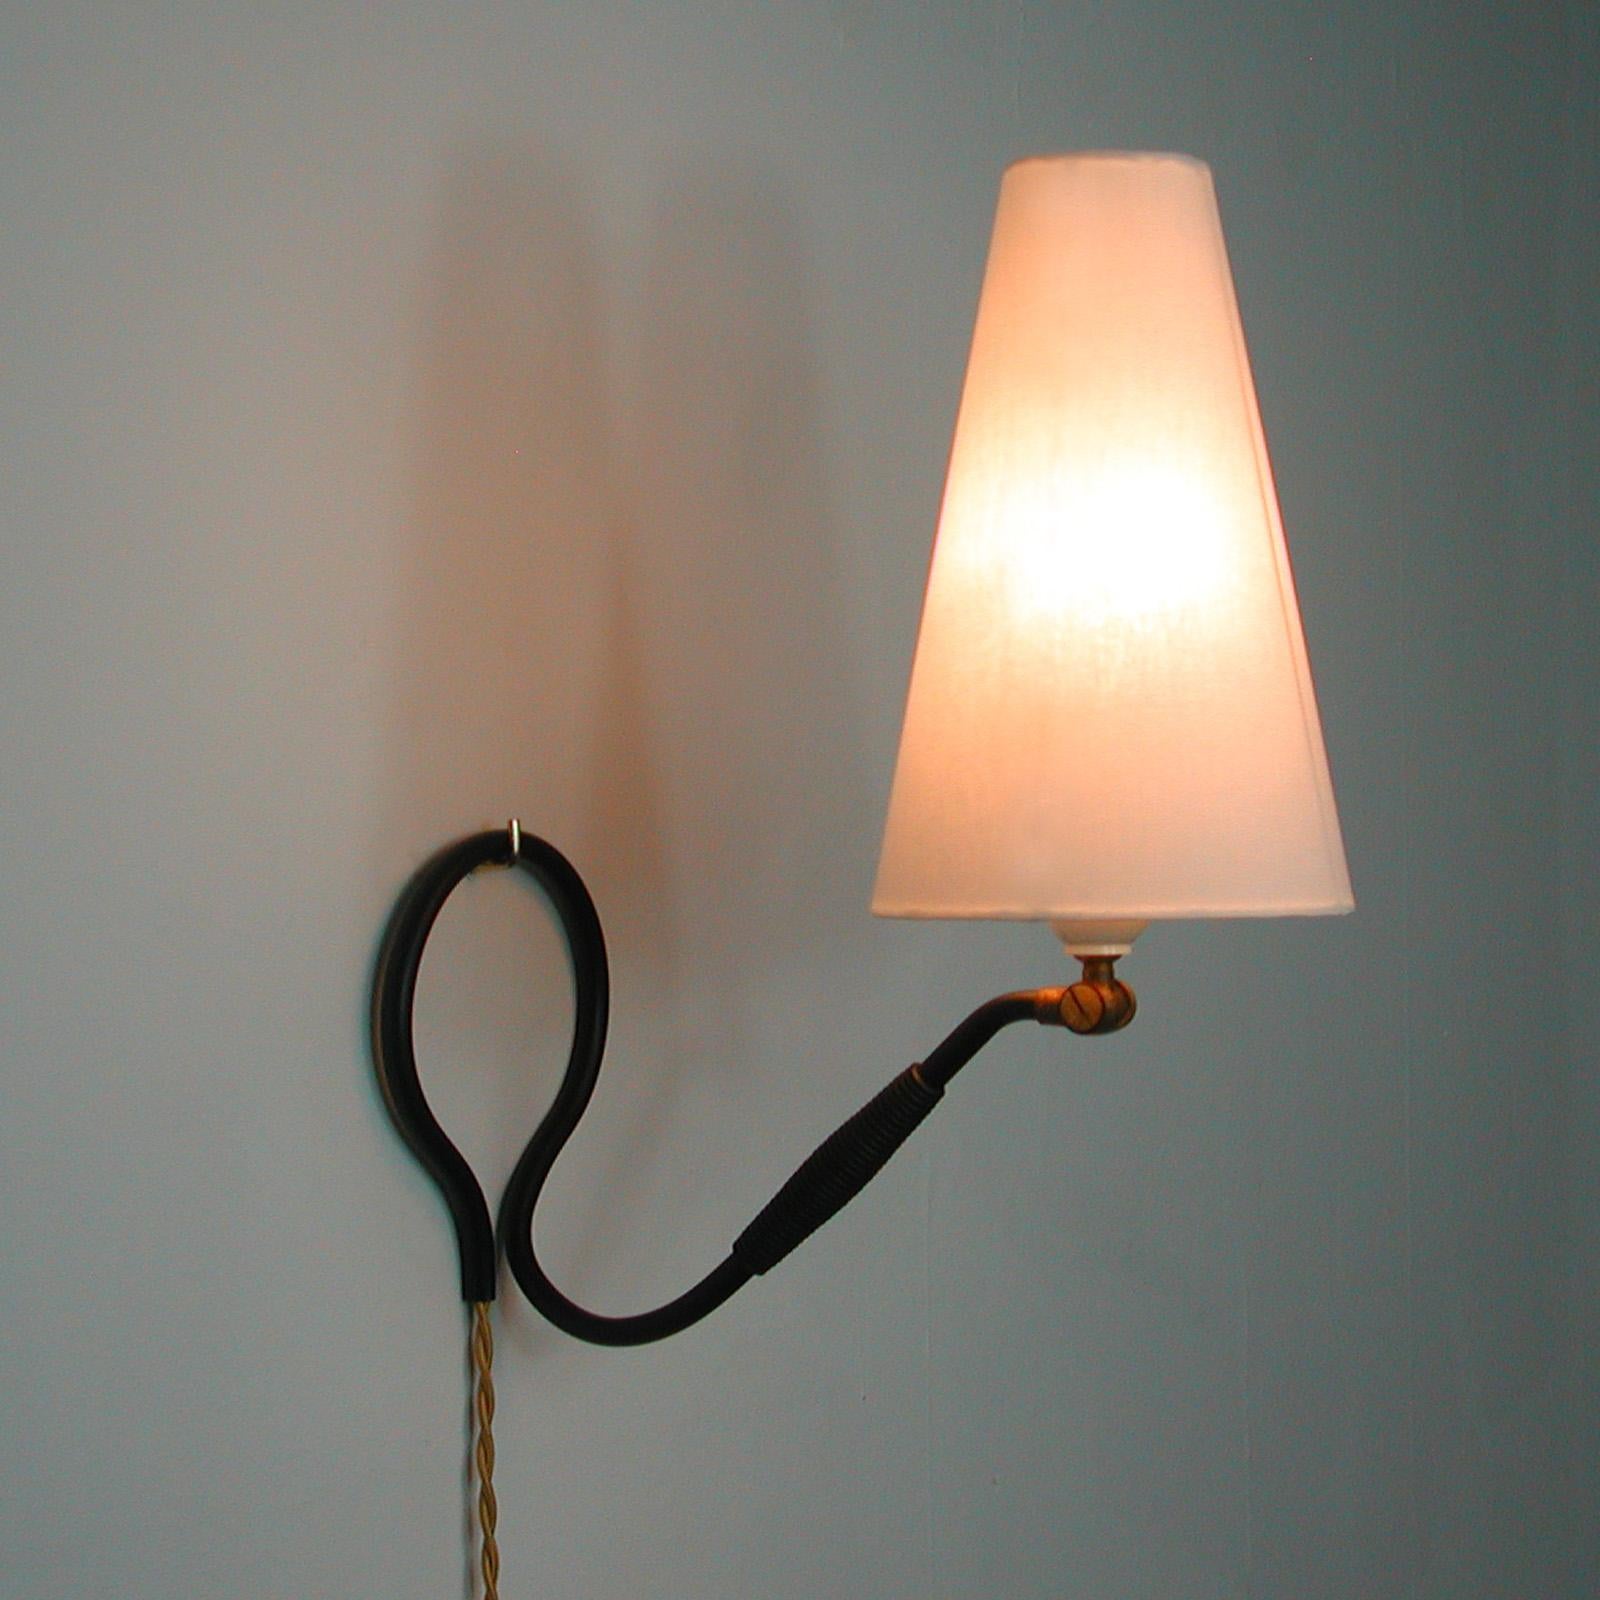 Mid-Century Modern Adjustable Black Brass and Bakelite Wall or Table Lamp 306 by Kaare Klint, 1950s For Sale